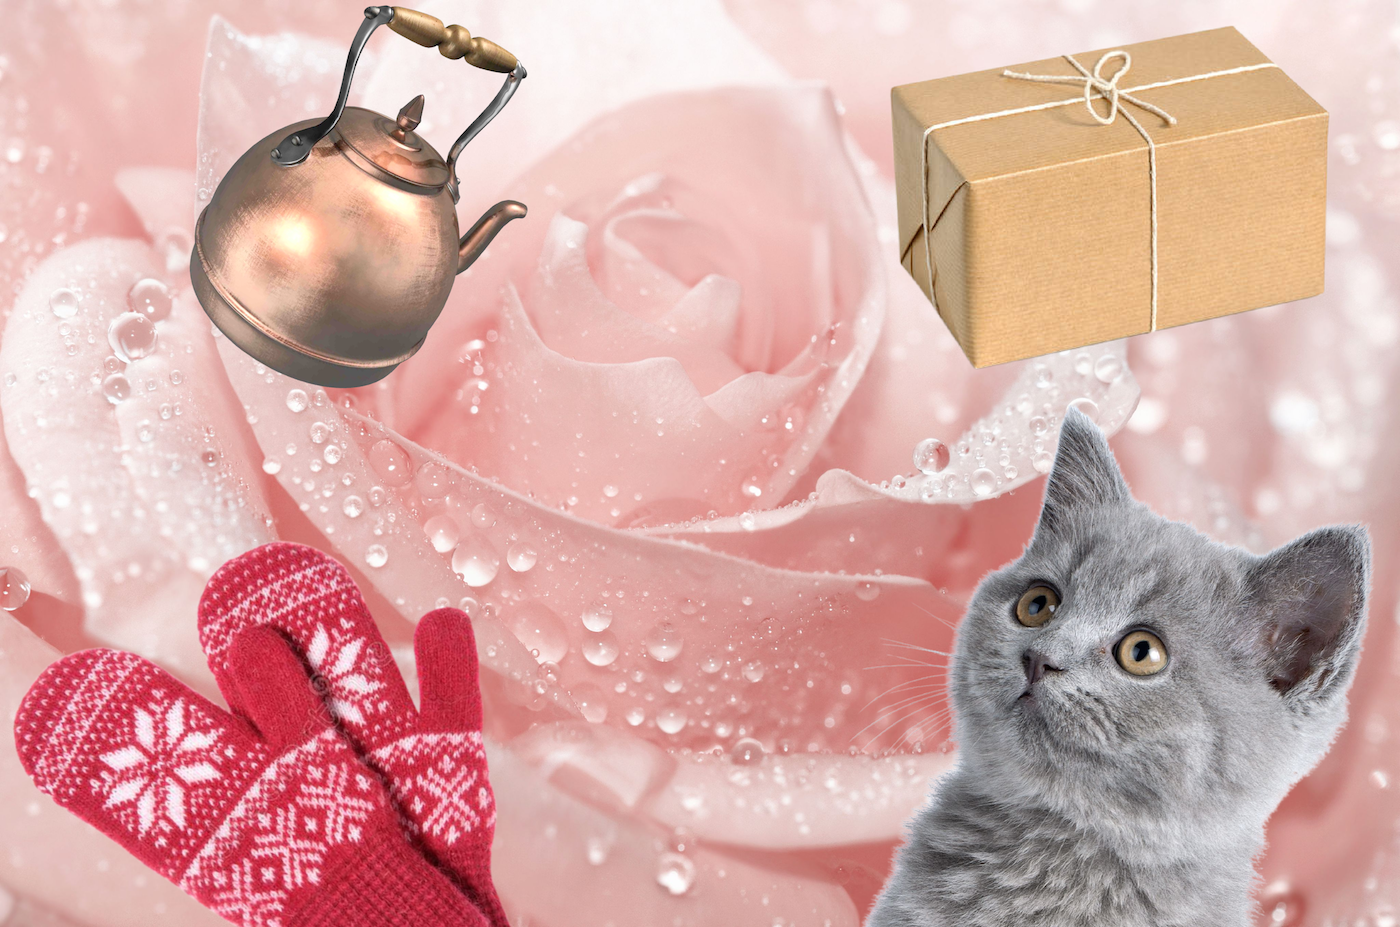 In the background is a pink rose with water droplets on its petals. Overlaid on the picture are a gray kitten with white whiskers, a copper kettle, a pair of red and white woolen mittens, and a package wrapped in brown paper and tied with string